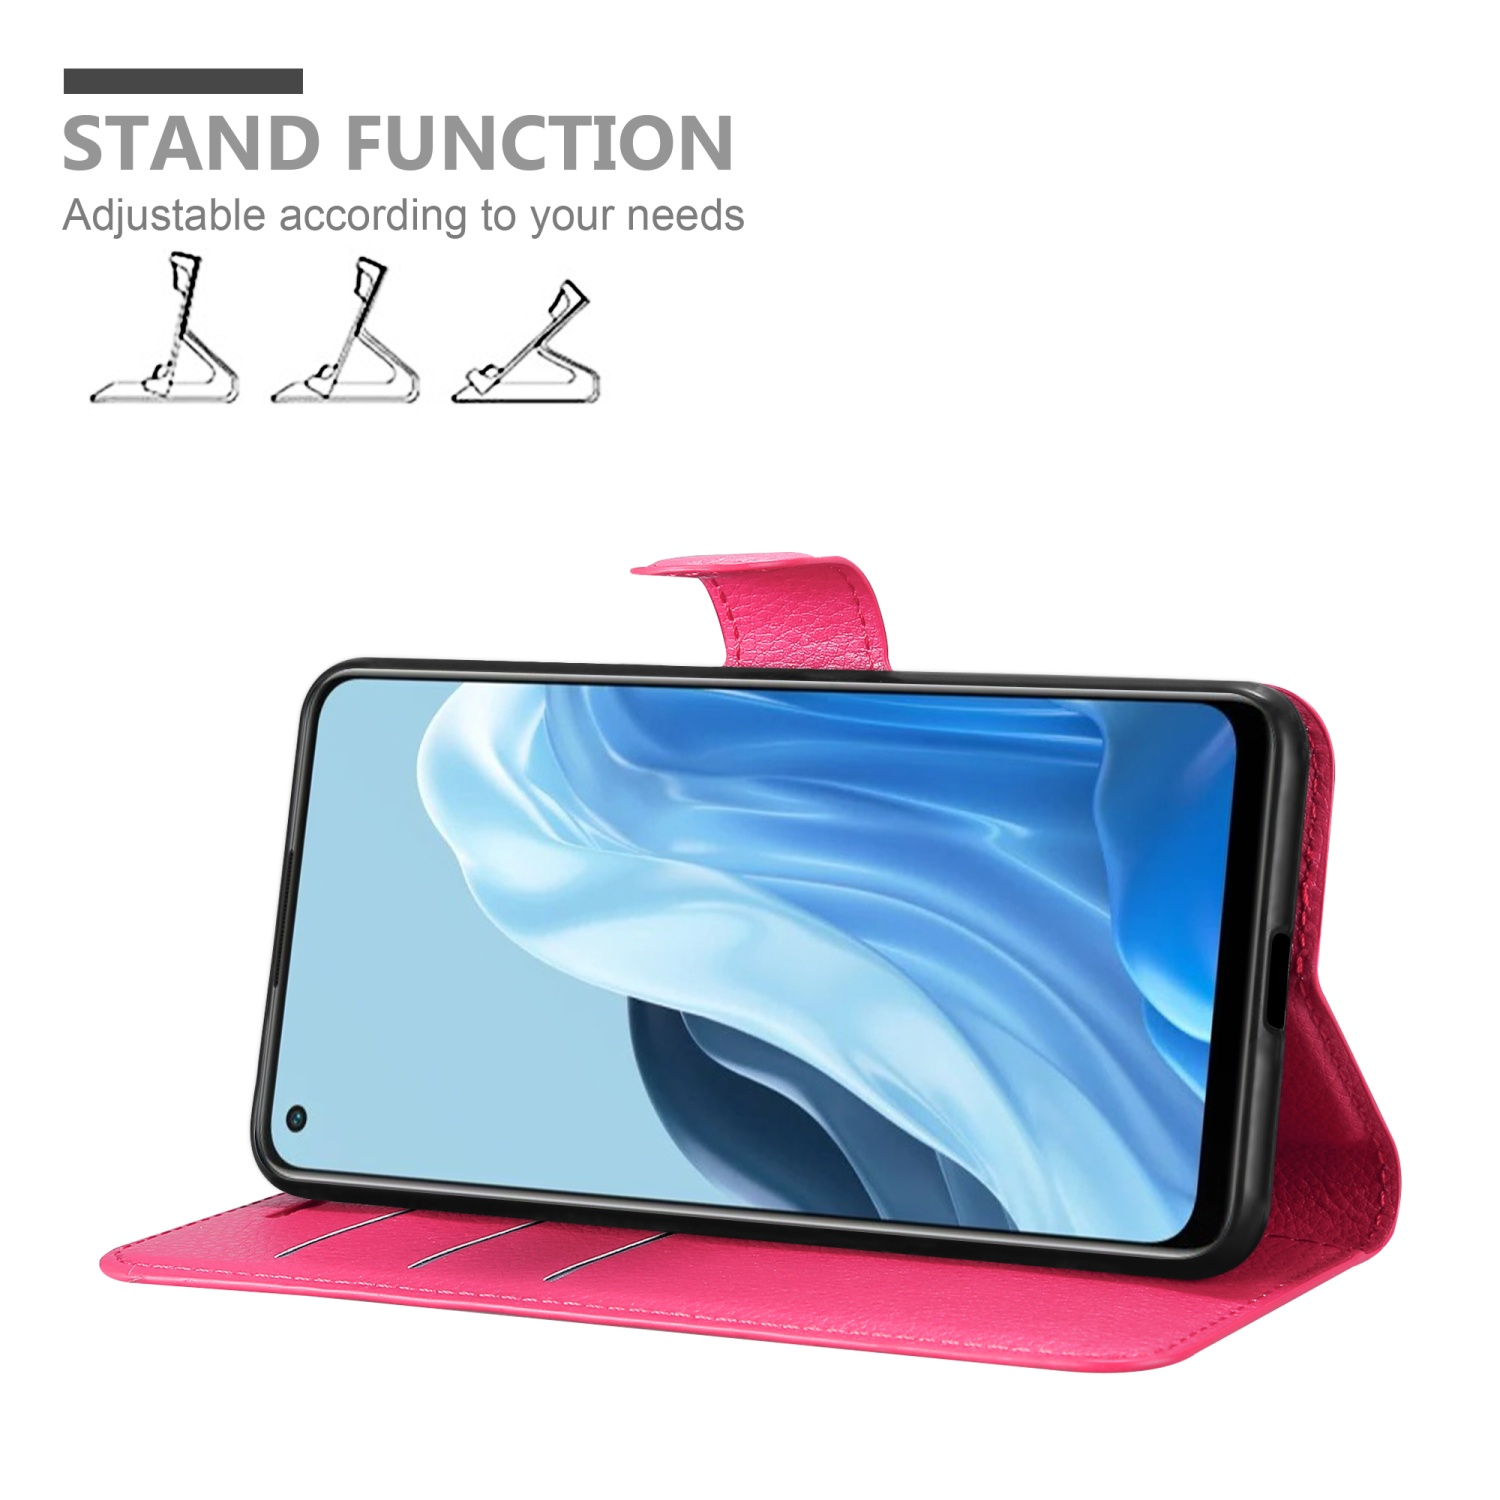 5G, Book FIND CHERRY Bookcover, PINK LITE Oppo, CADORABO Standfunktion, X5 Hülle Reno7 /